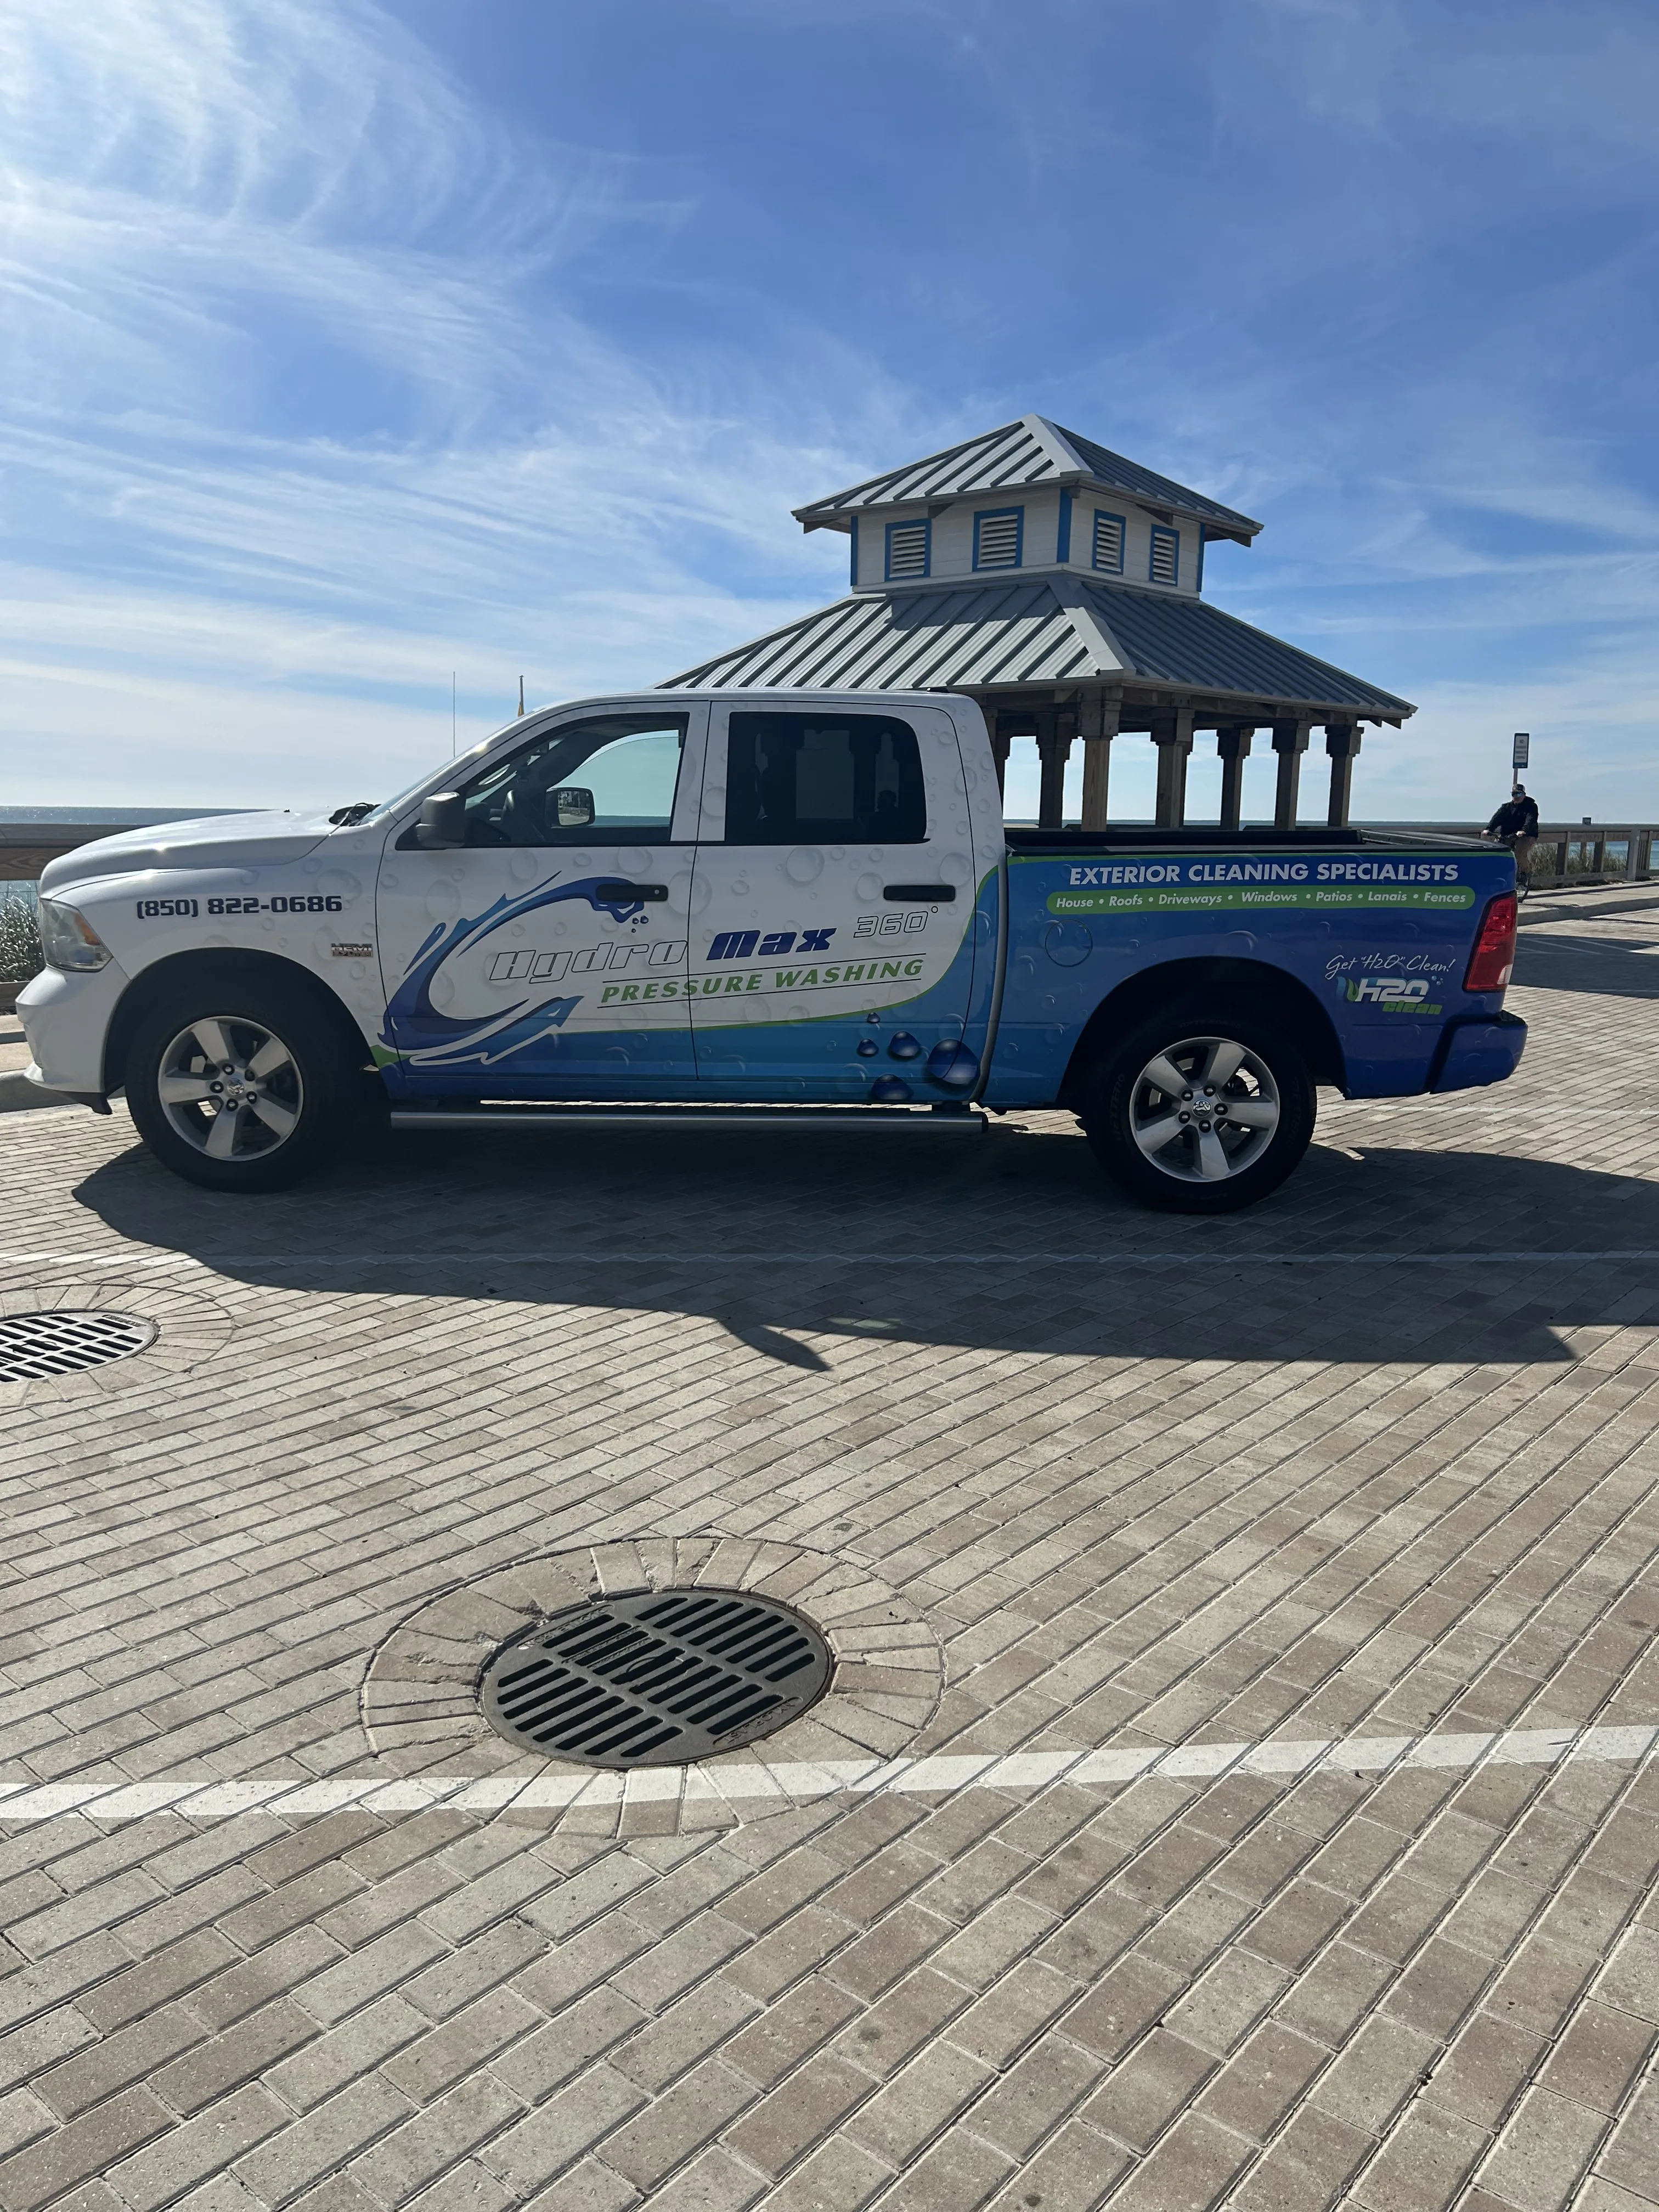 State-of-the-art pressure washing tools used by Hydro Max 360 in Santa Rosa Beach.